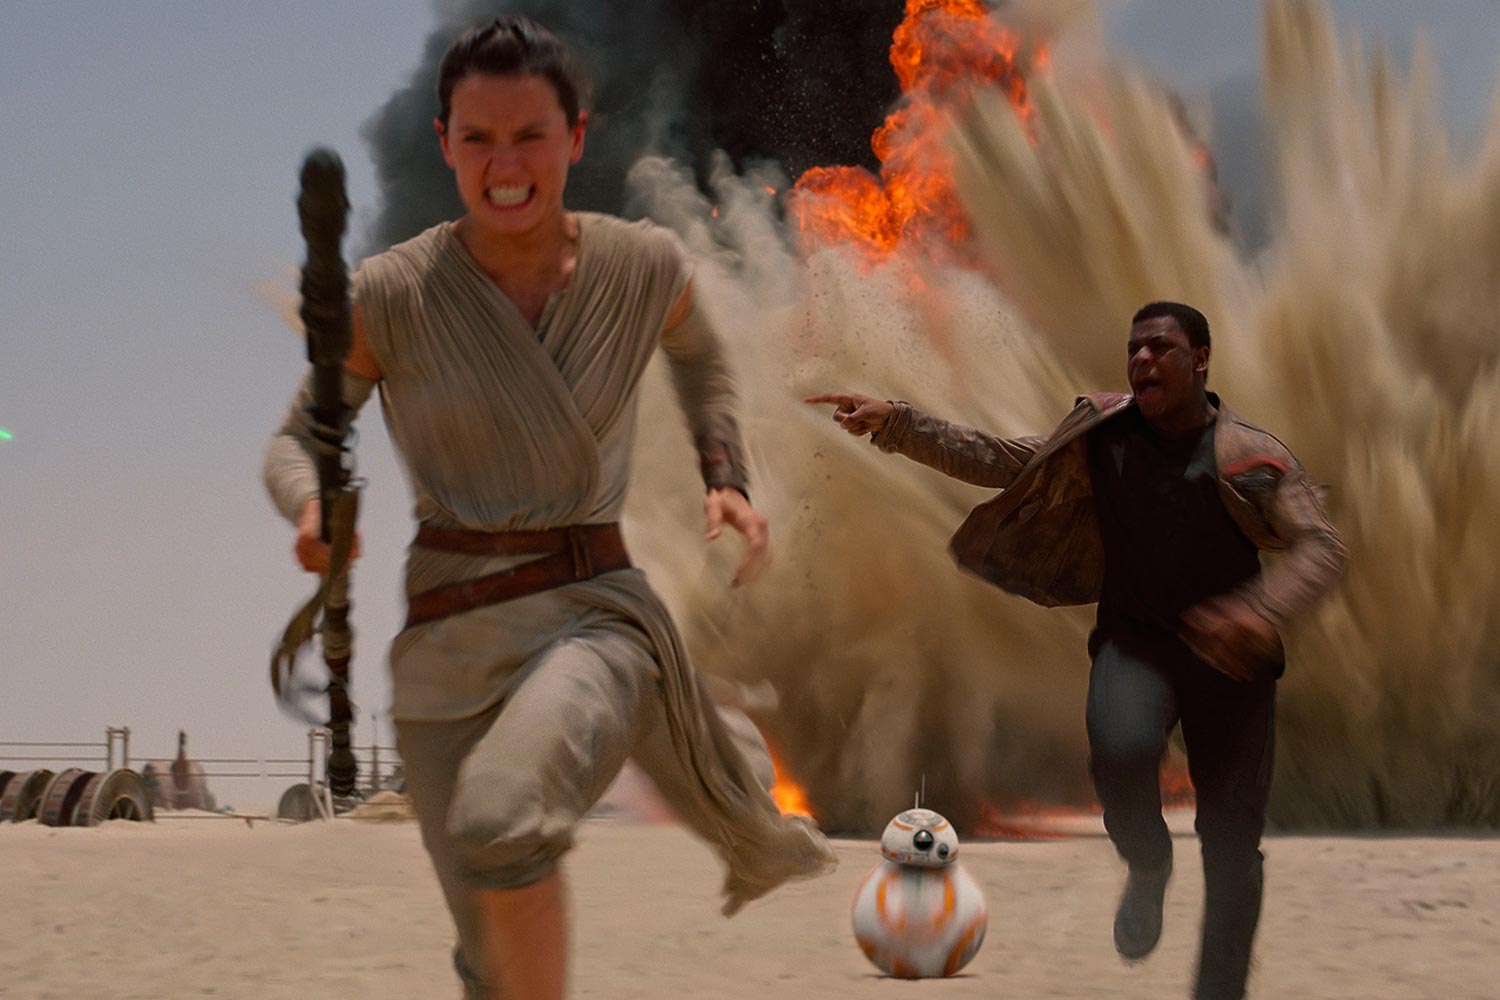 Rey runs from an explosion in Star Wars: The Force Awakens.